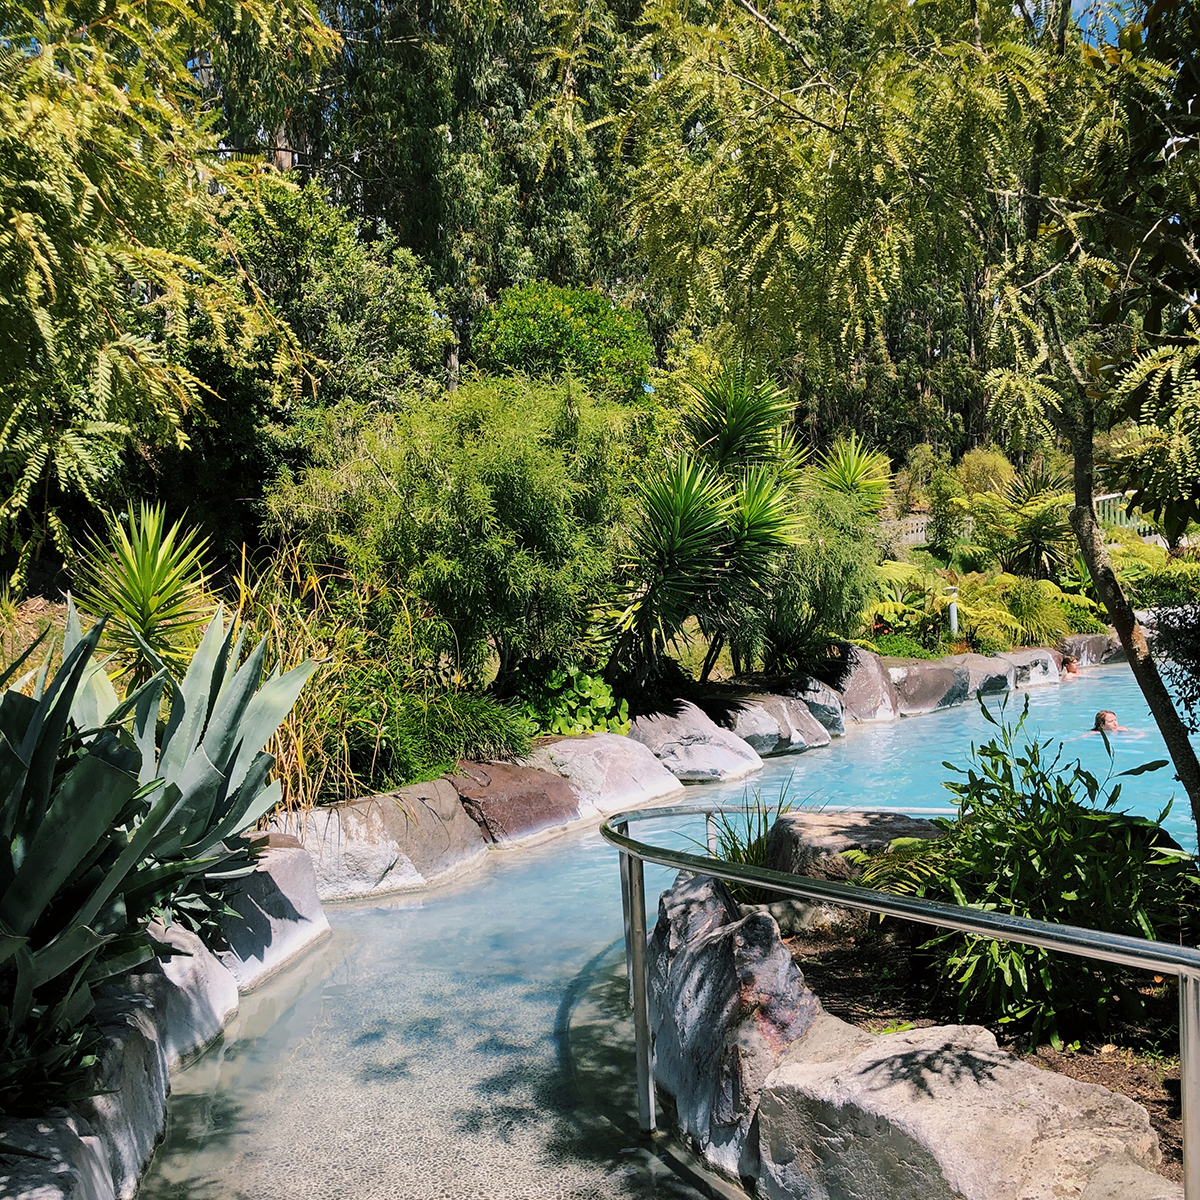 A ramp into one of the pools at Wairakei Terraces Thermal Pool provides an accessible entrance.